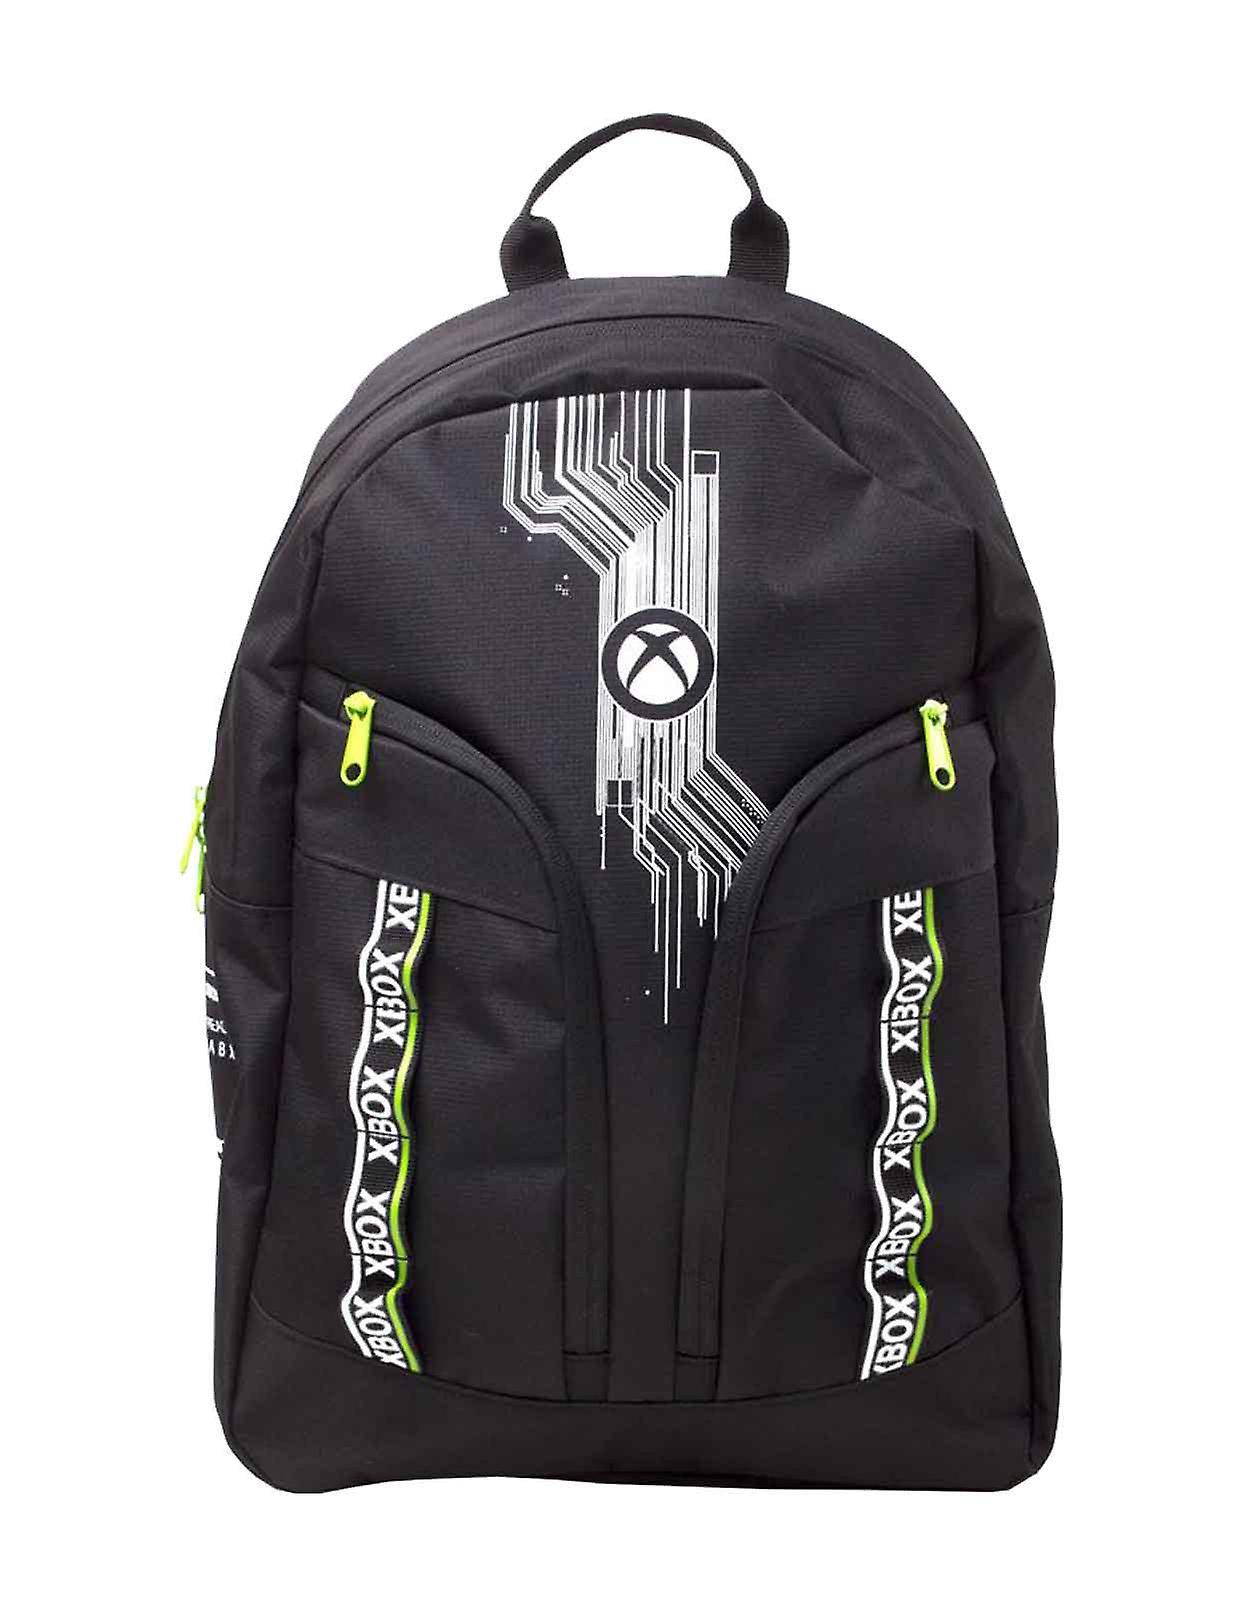 Xbox - The X Backpack